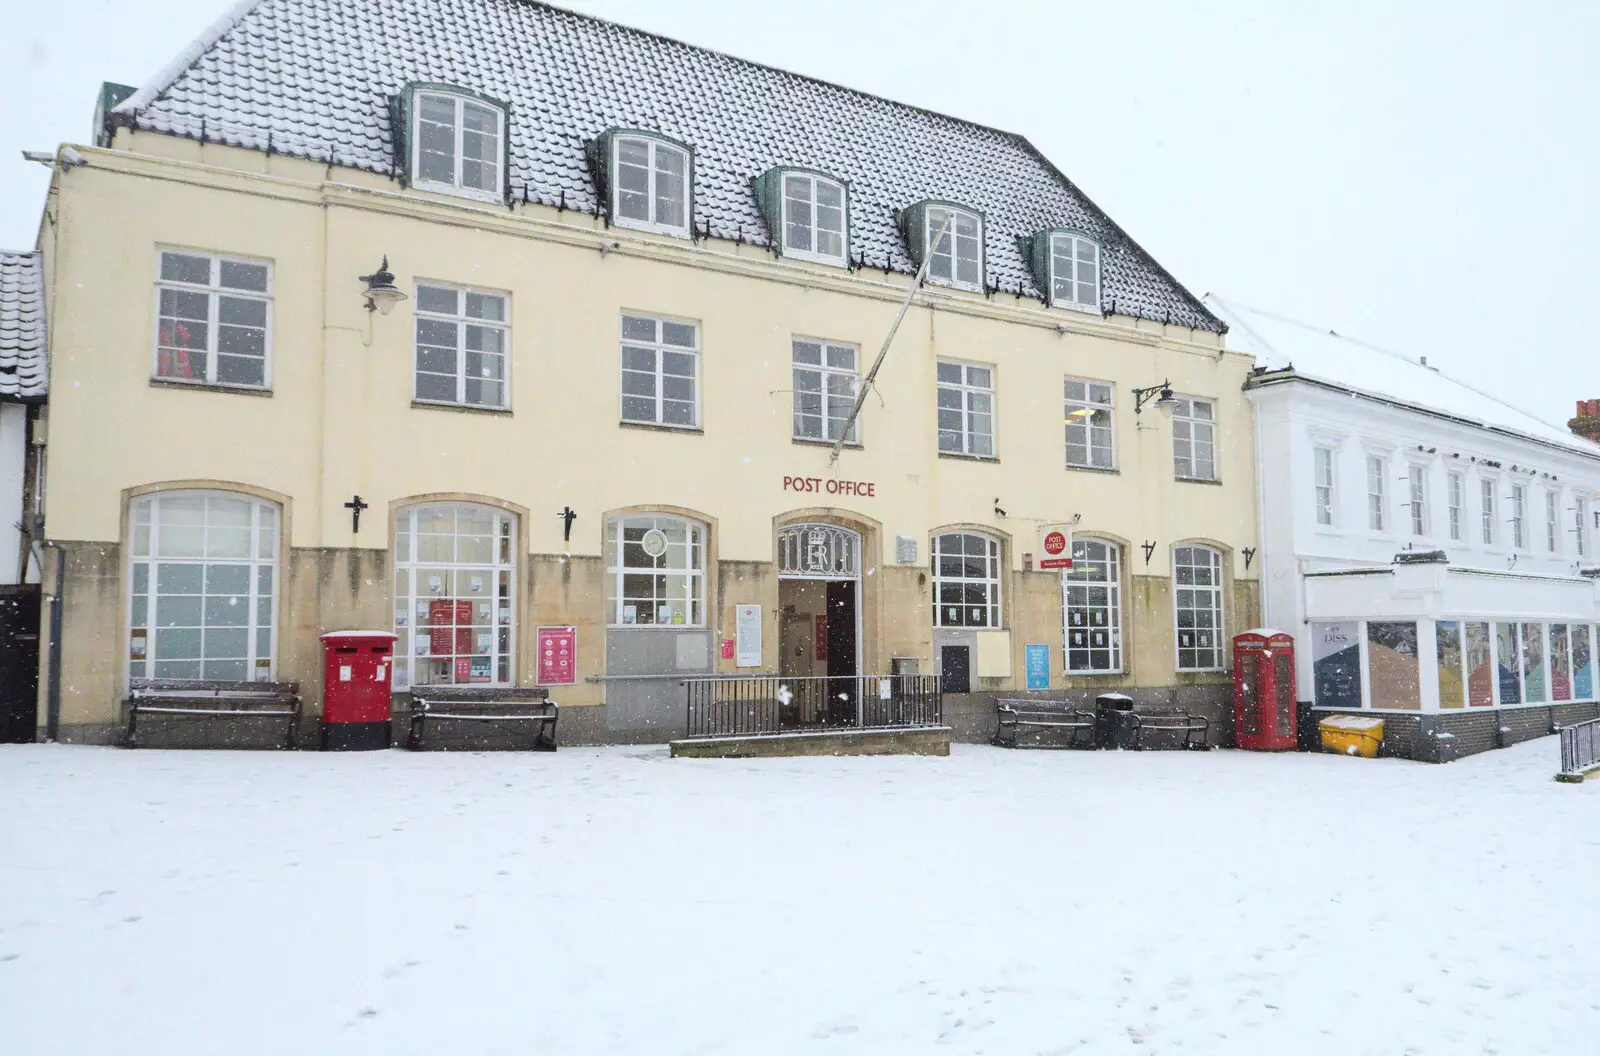 The model-railway Post Office, from A Snowy Morning, Diss, Norfolk - 16th January 2021